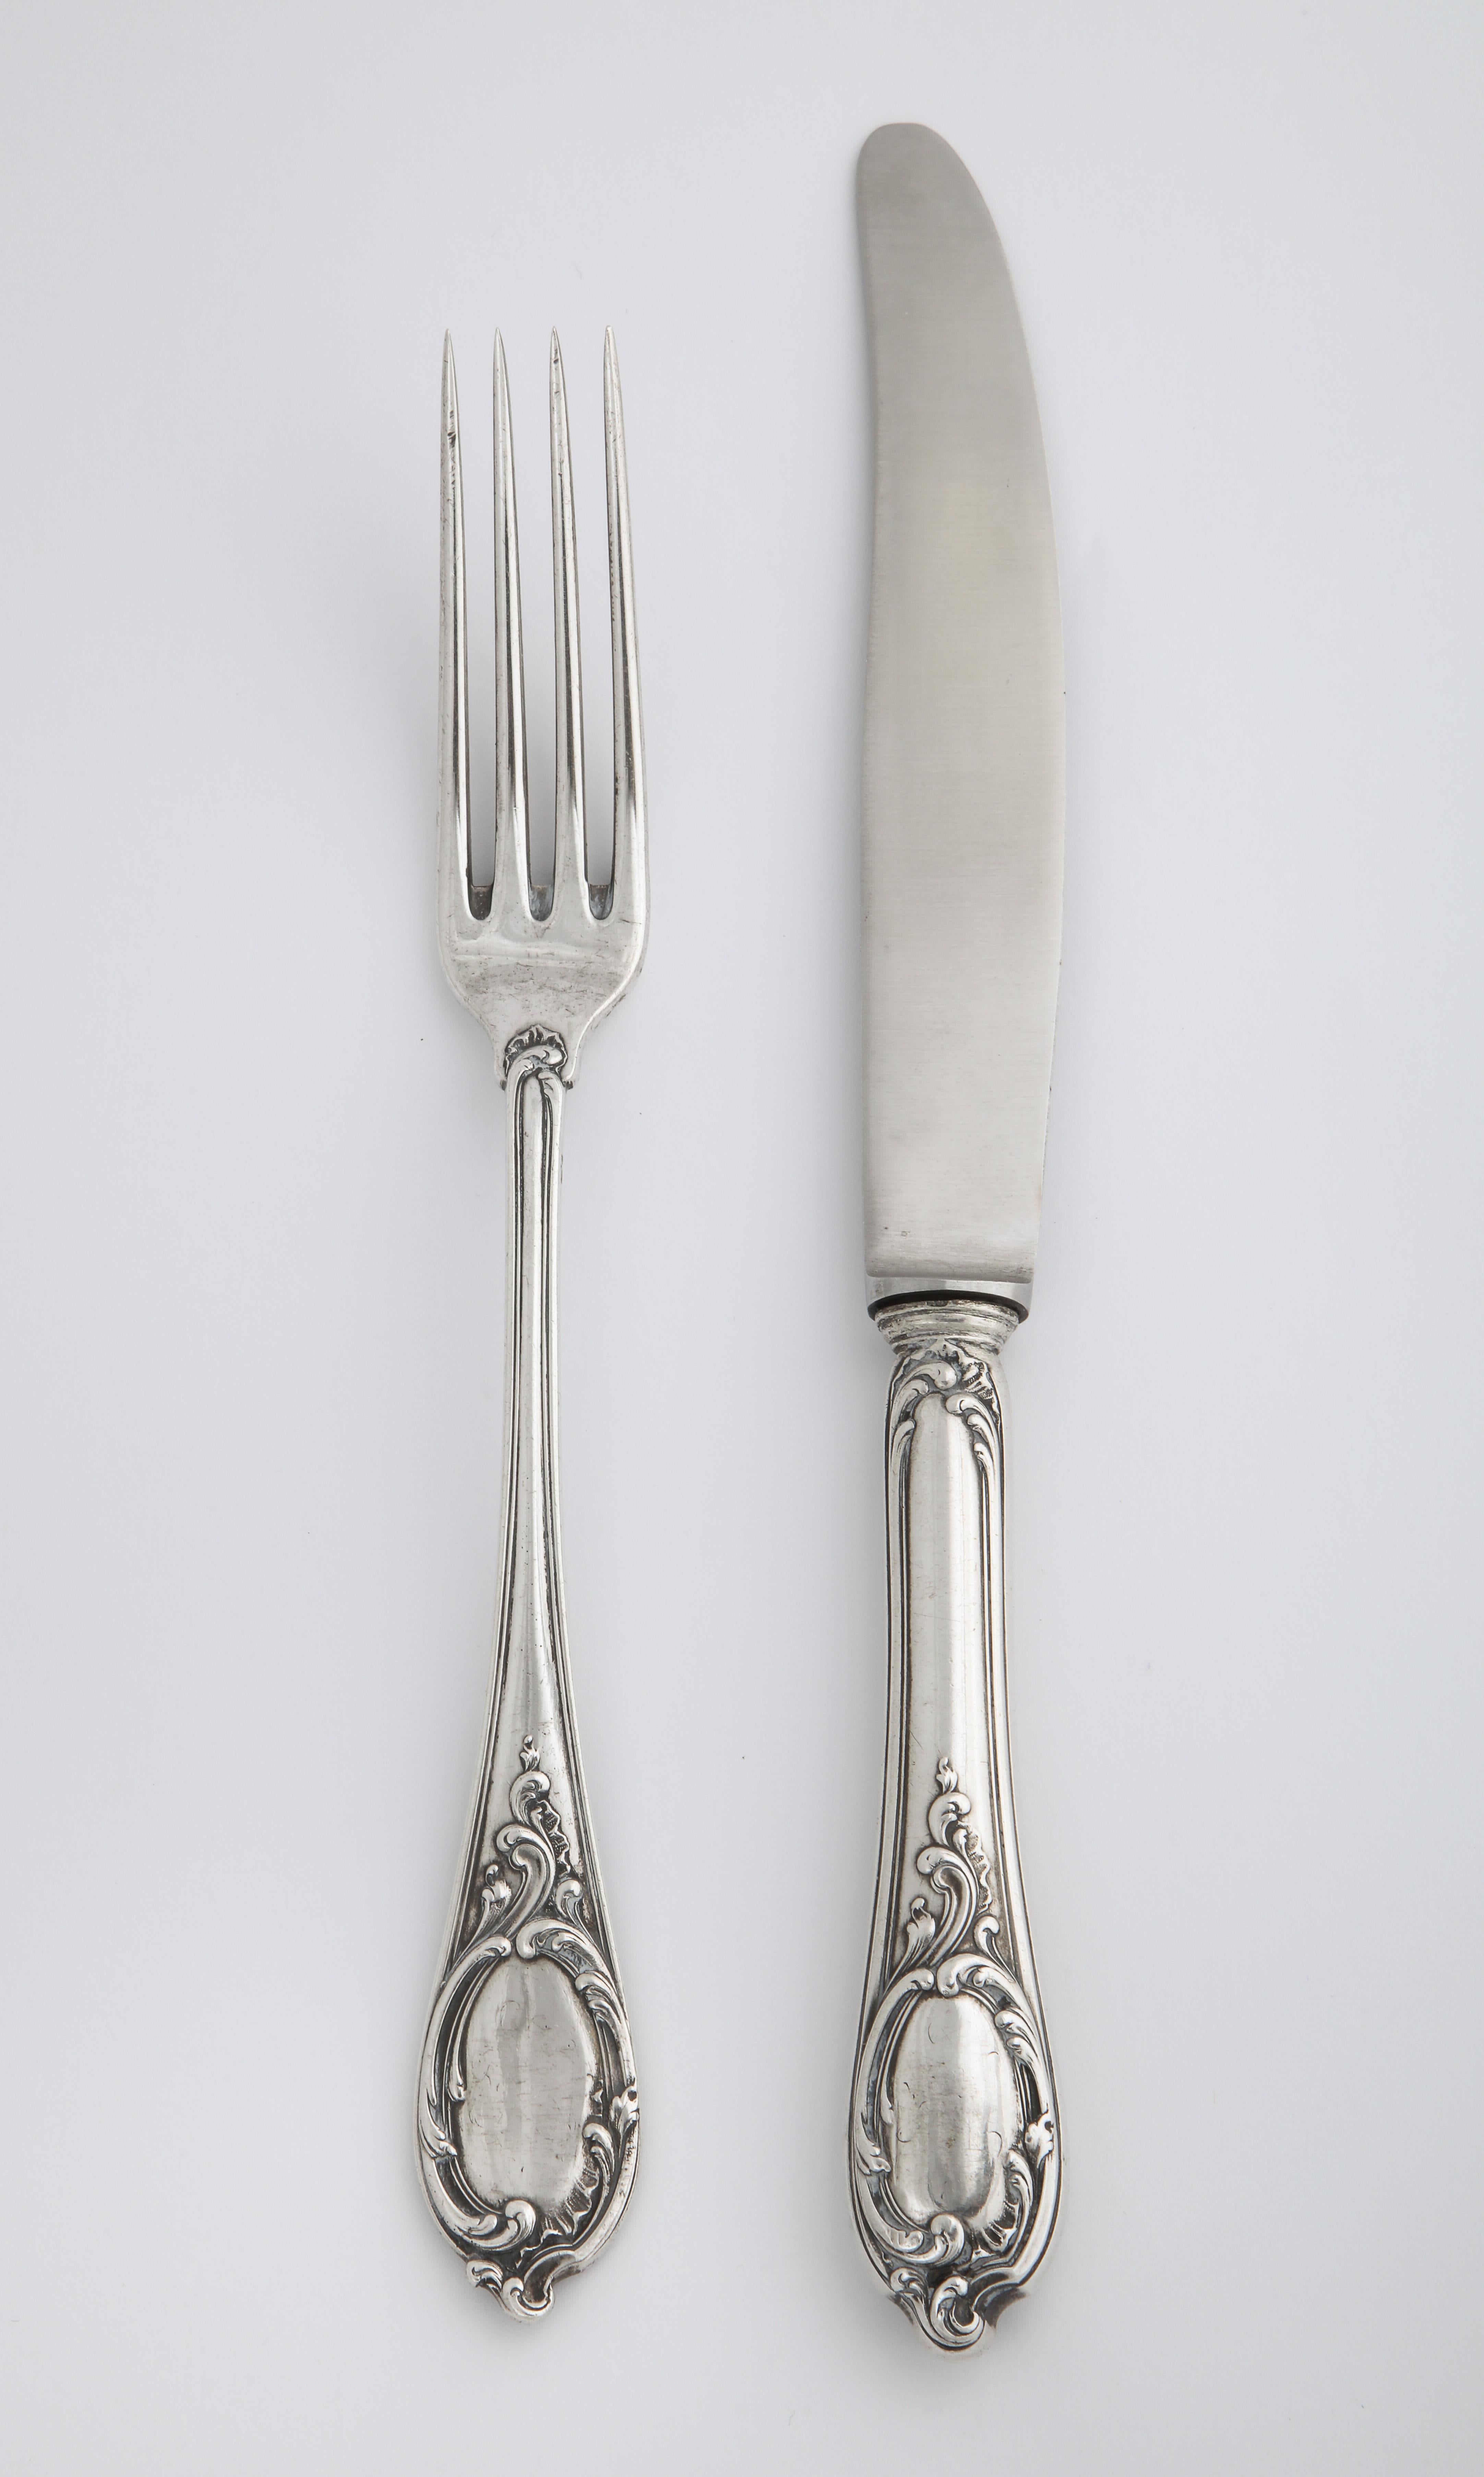 From the Romanov era, period of Czar Nicholas II, a silver knife and fork pair in the Rococo taste by Russia’s most famous silversmith, Carl Fabergé, each decorated with scrolls enclosing a vacant cartouche, the knife fitted with a later steel